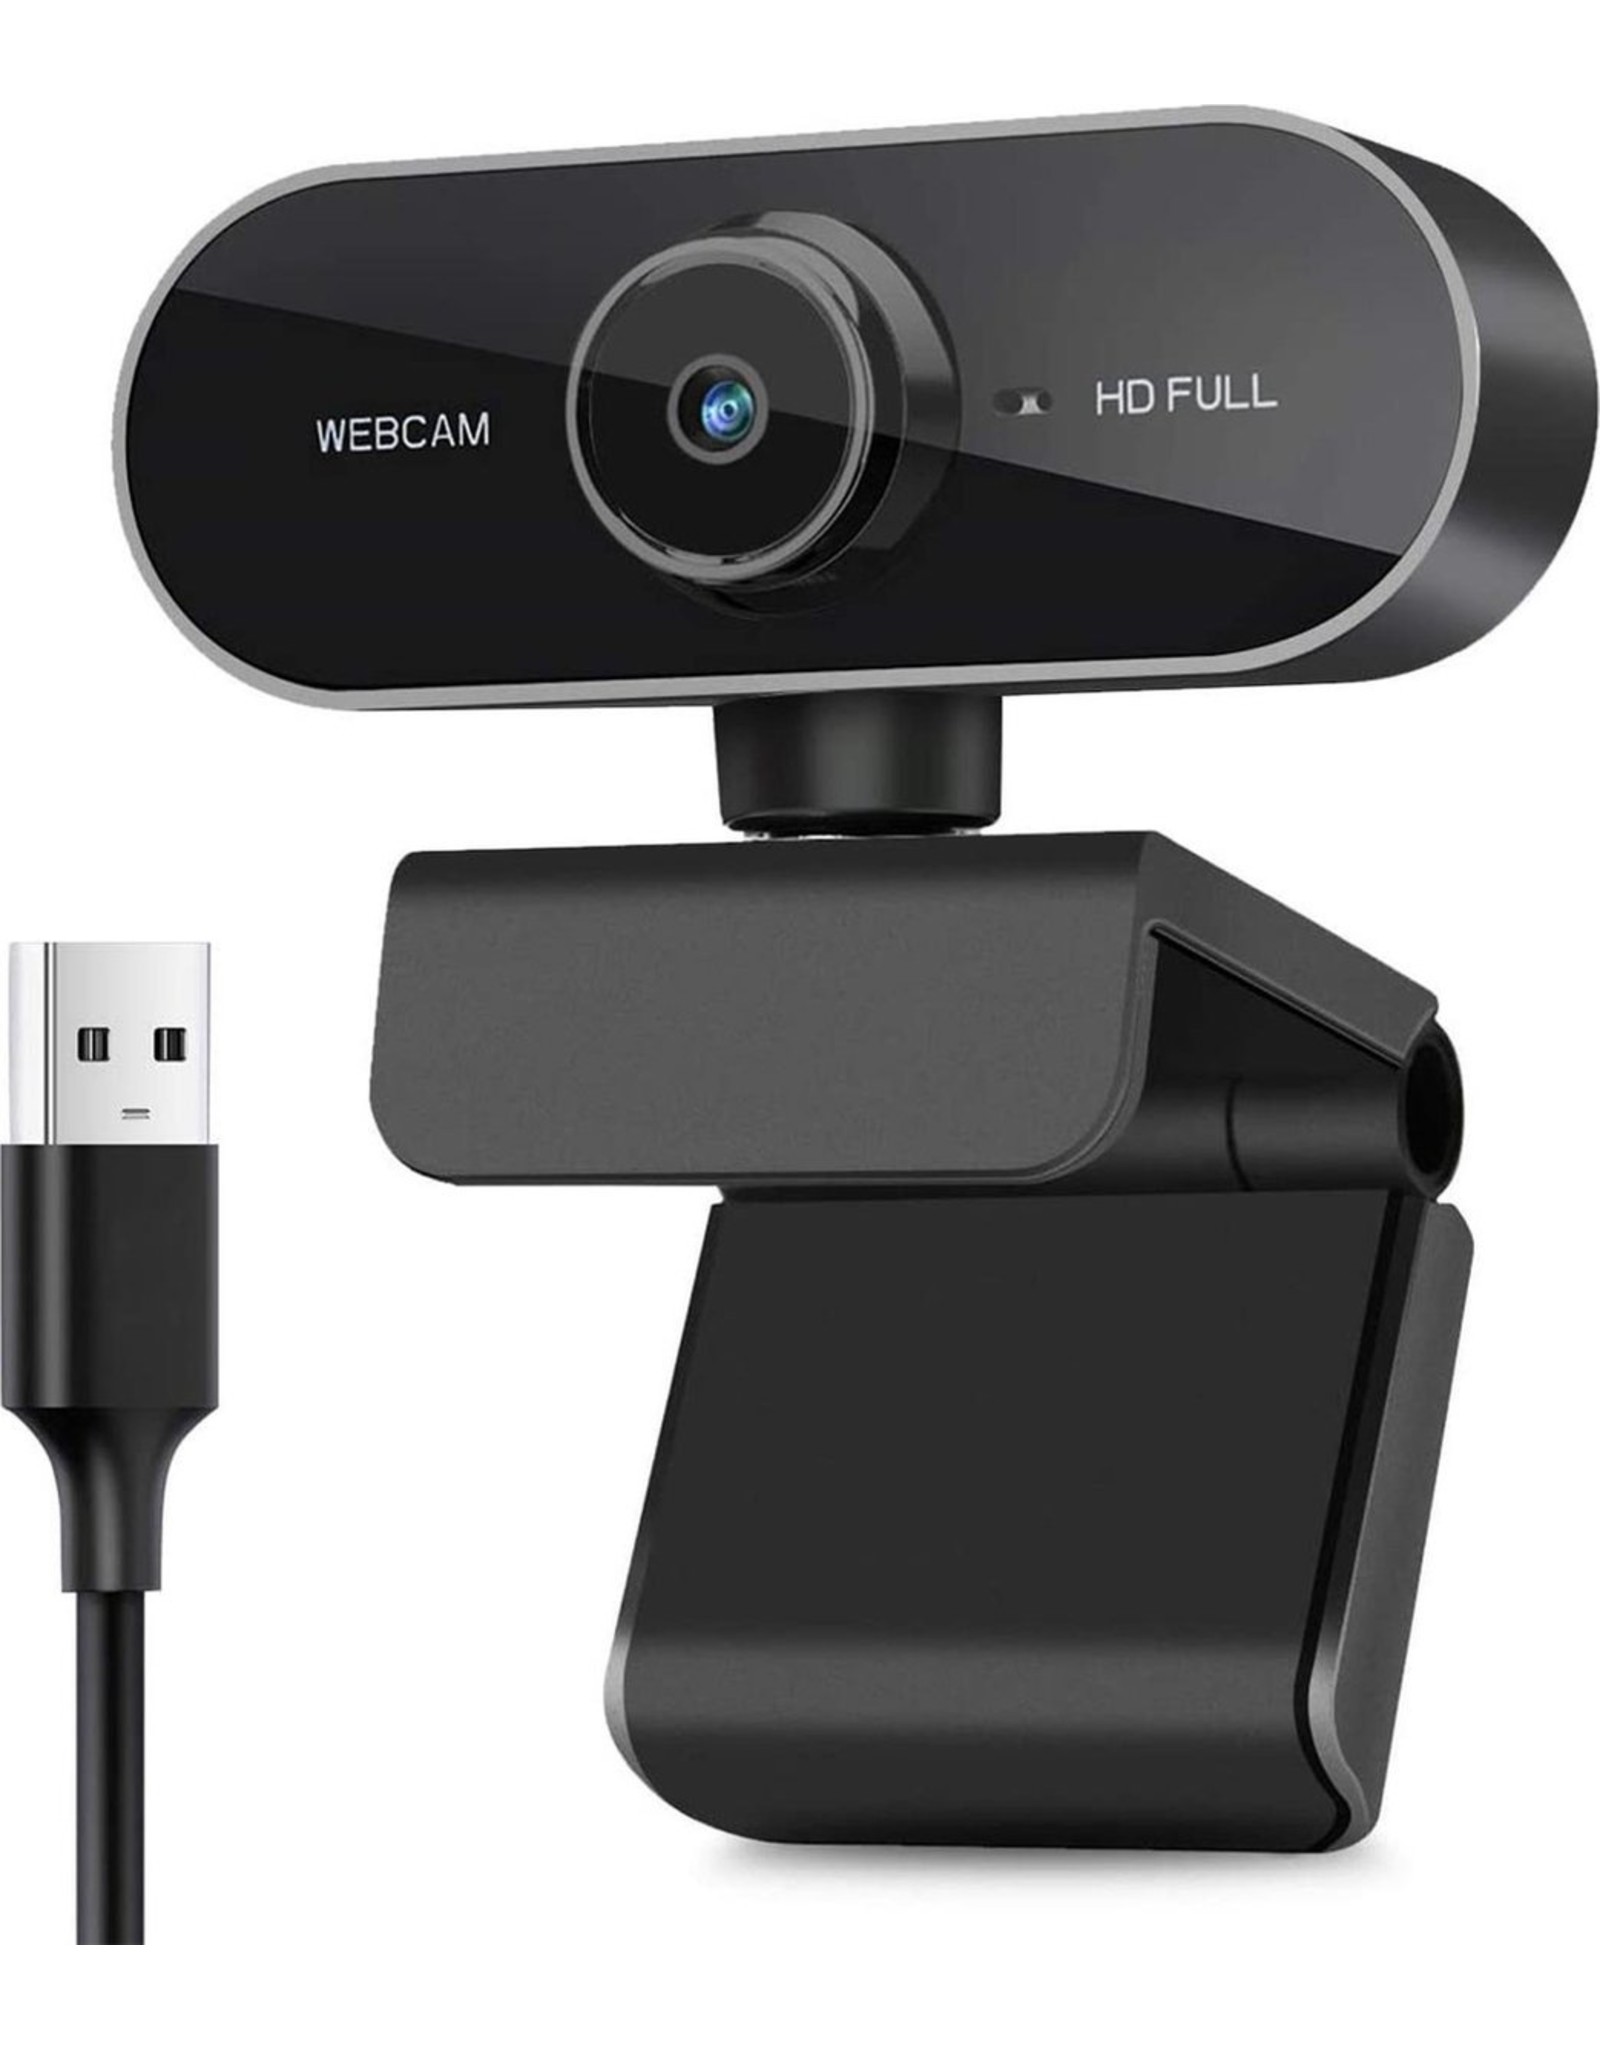 Webcam full HD (1080p) - With built-in microphone